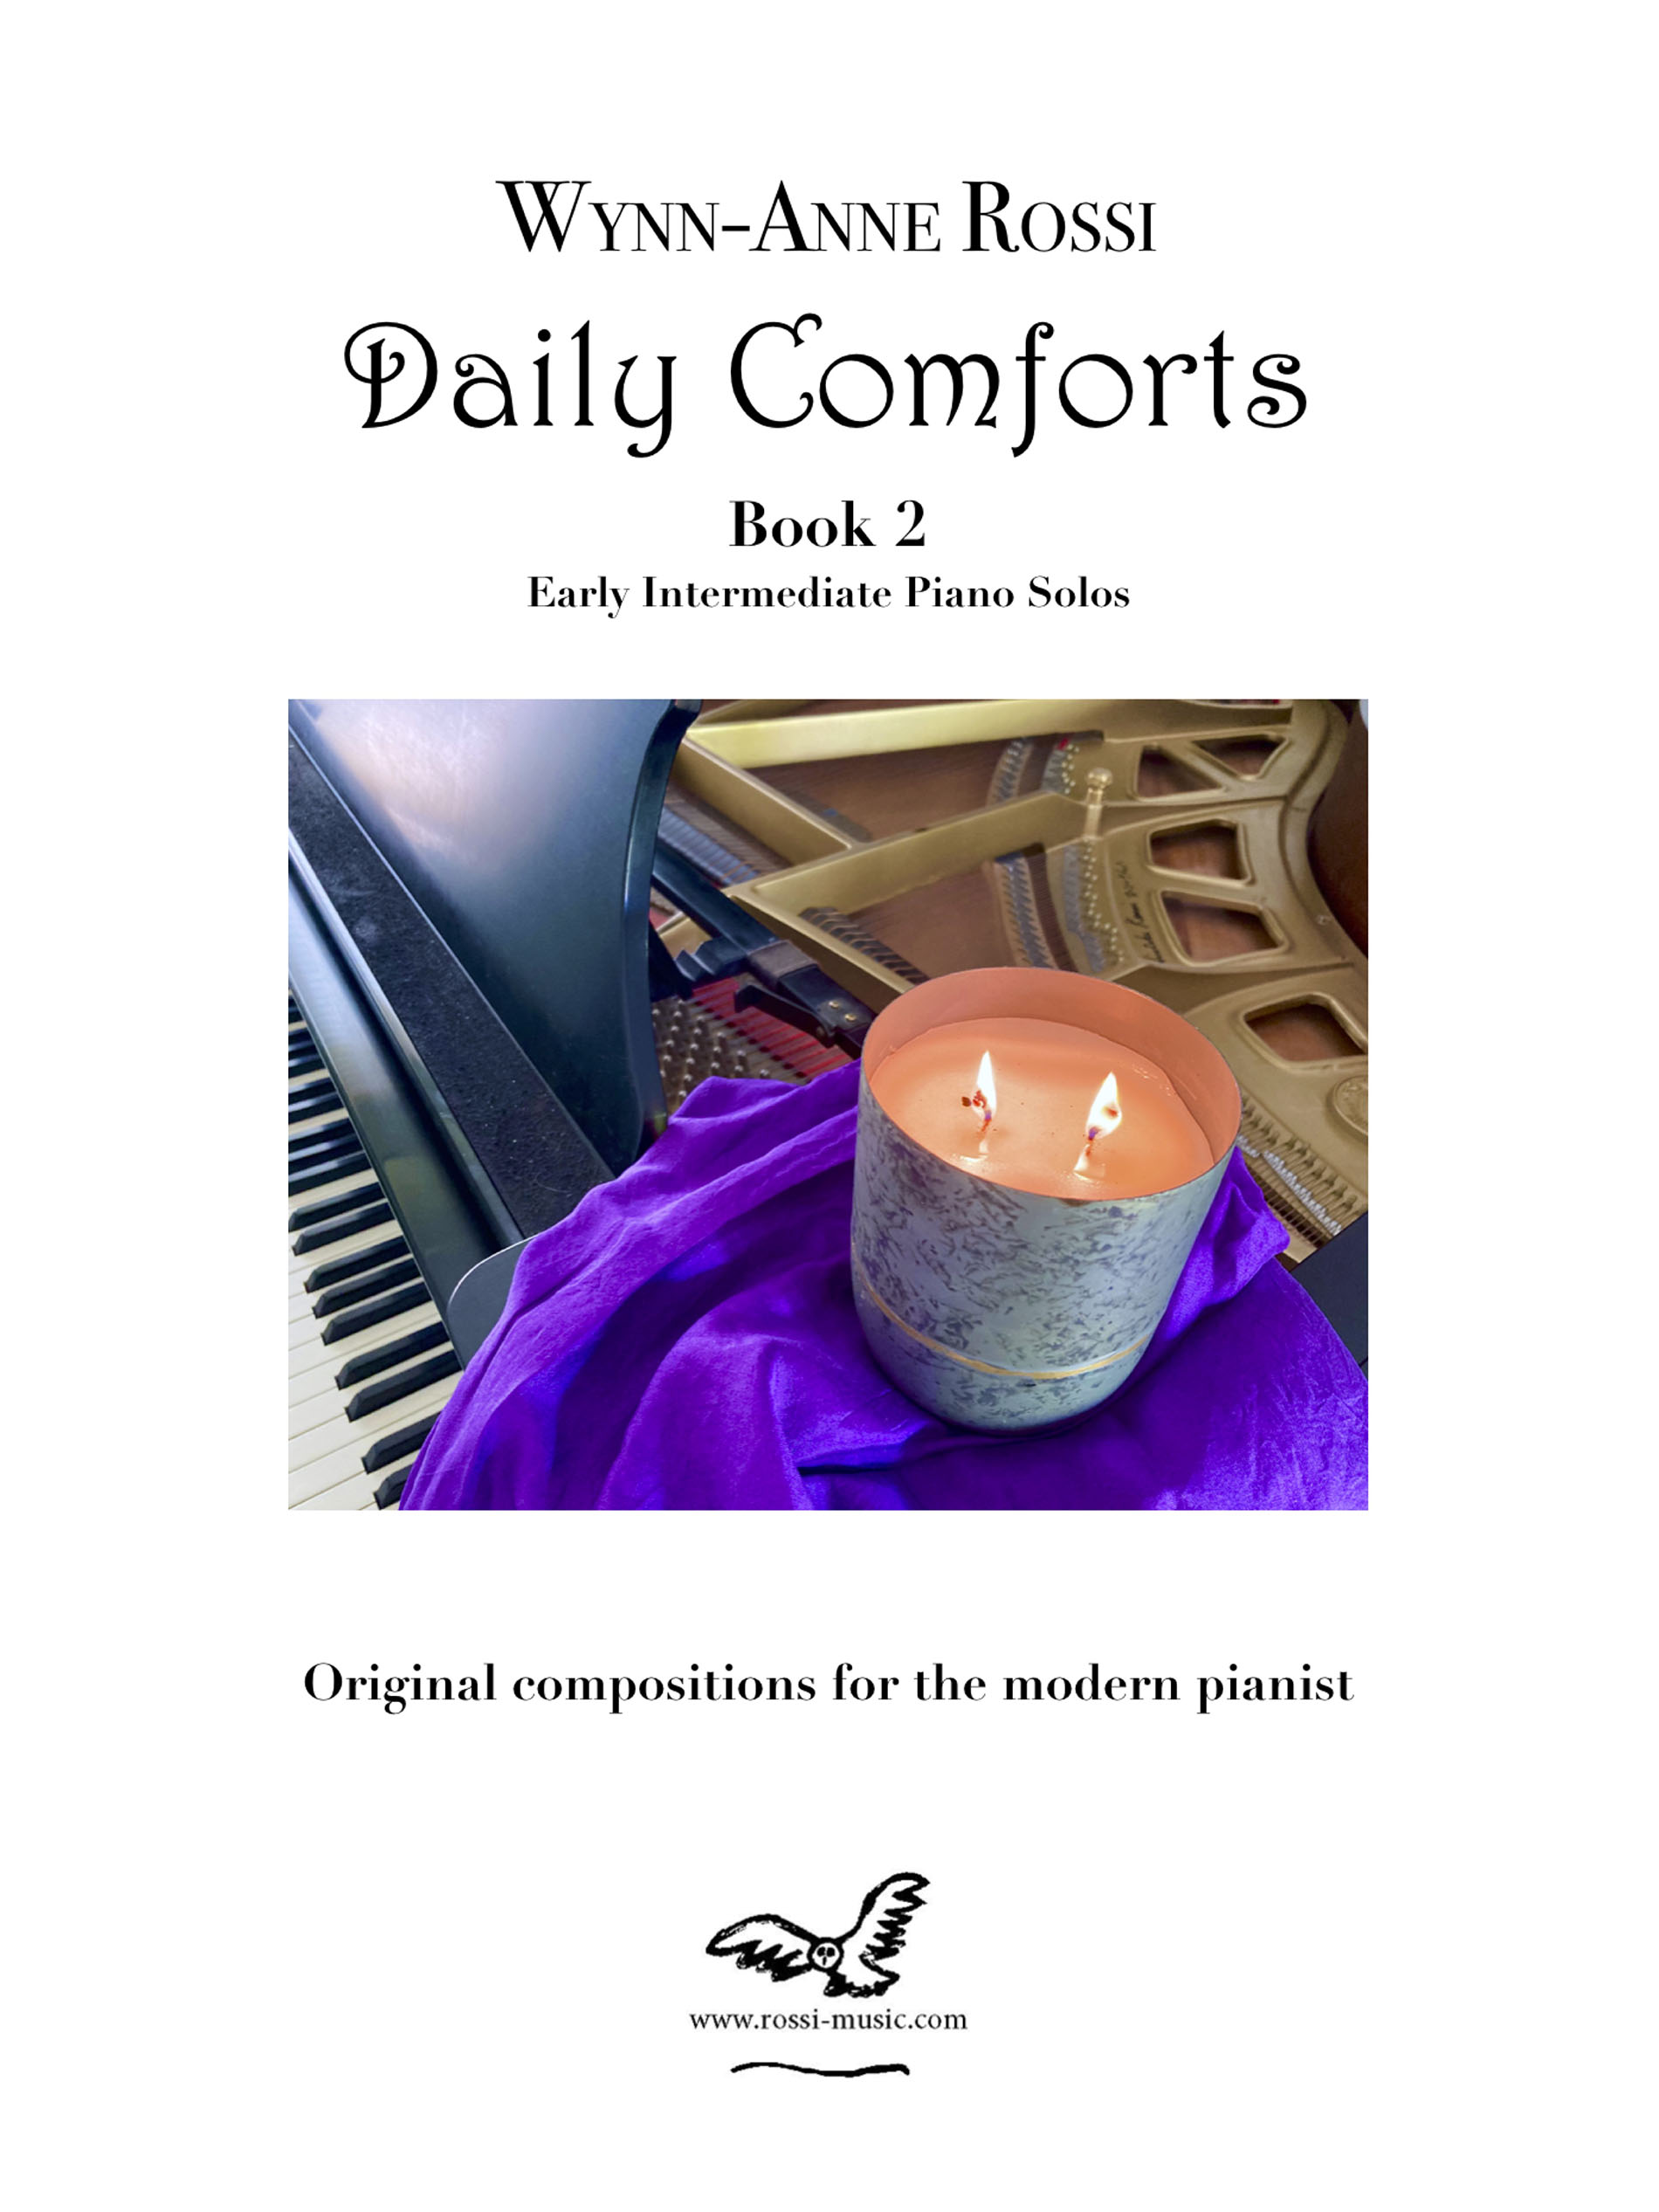 Daily Comforts - Book 2 cover